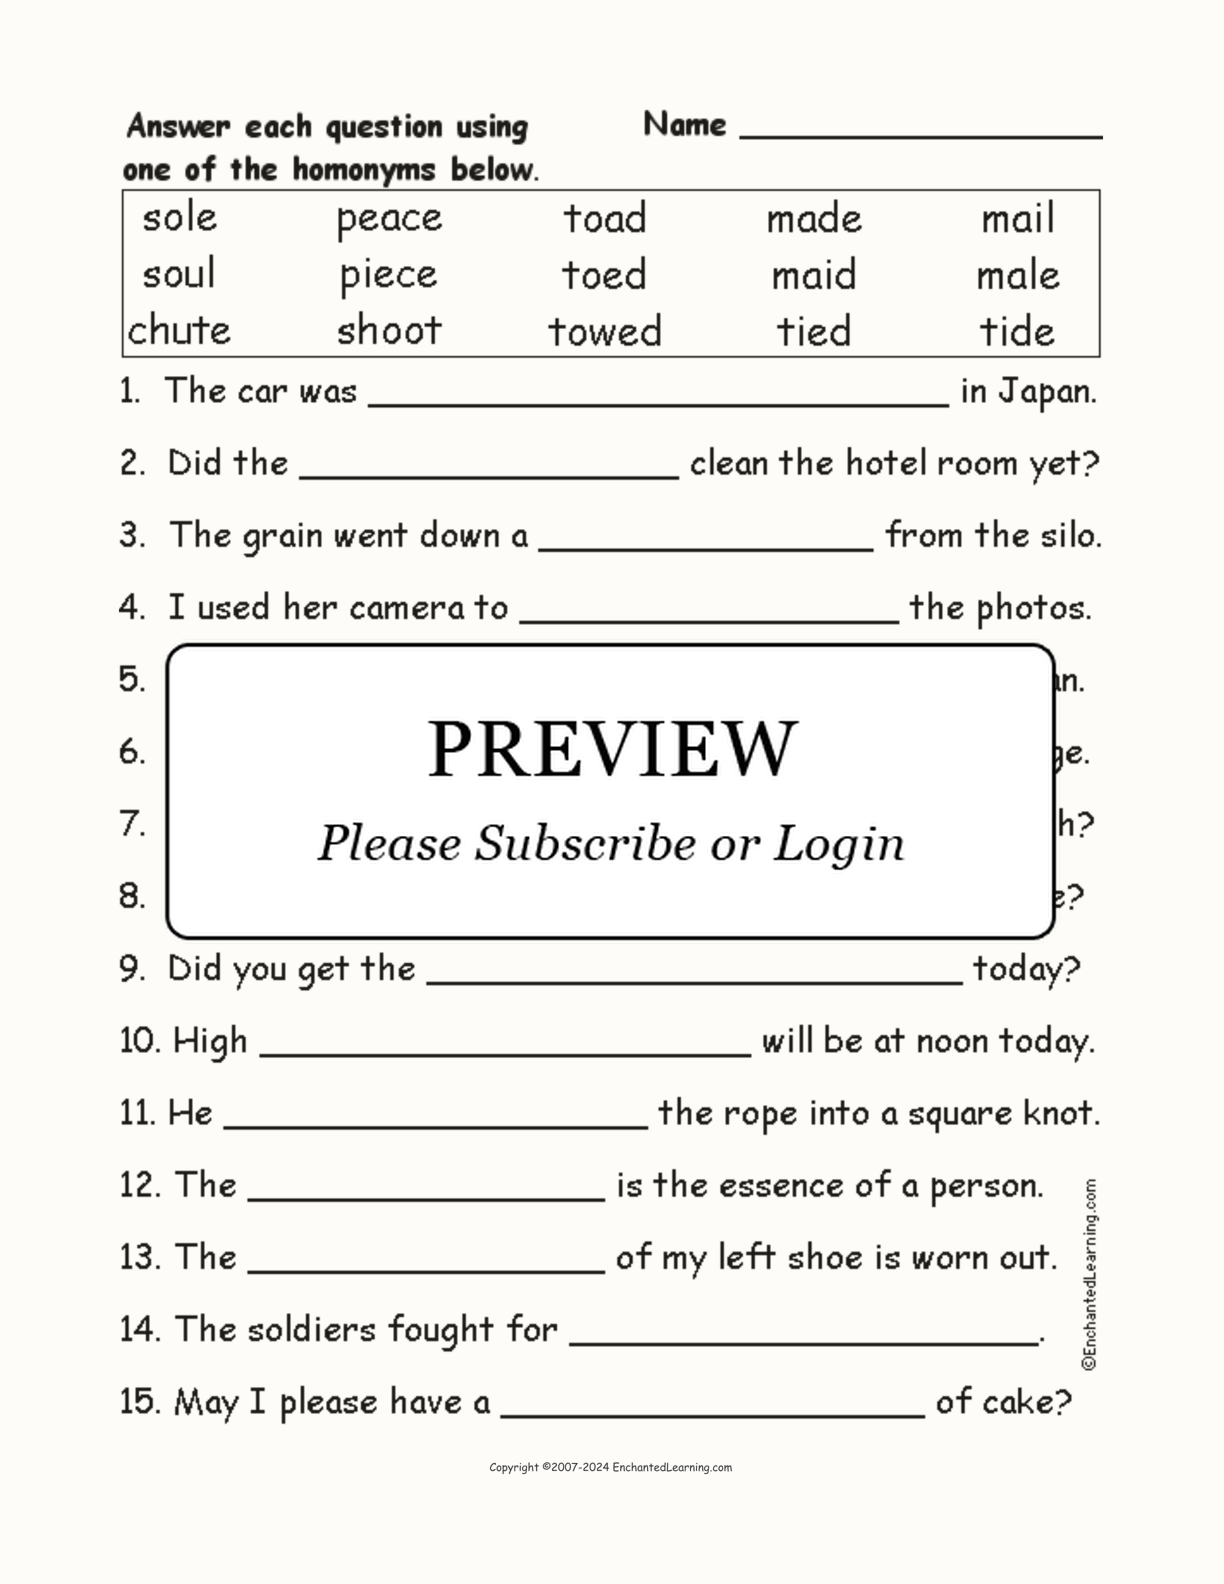 Homonyms Spelling Word Questions #9 interactive worksheet page 1